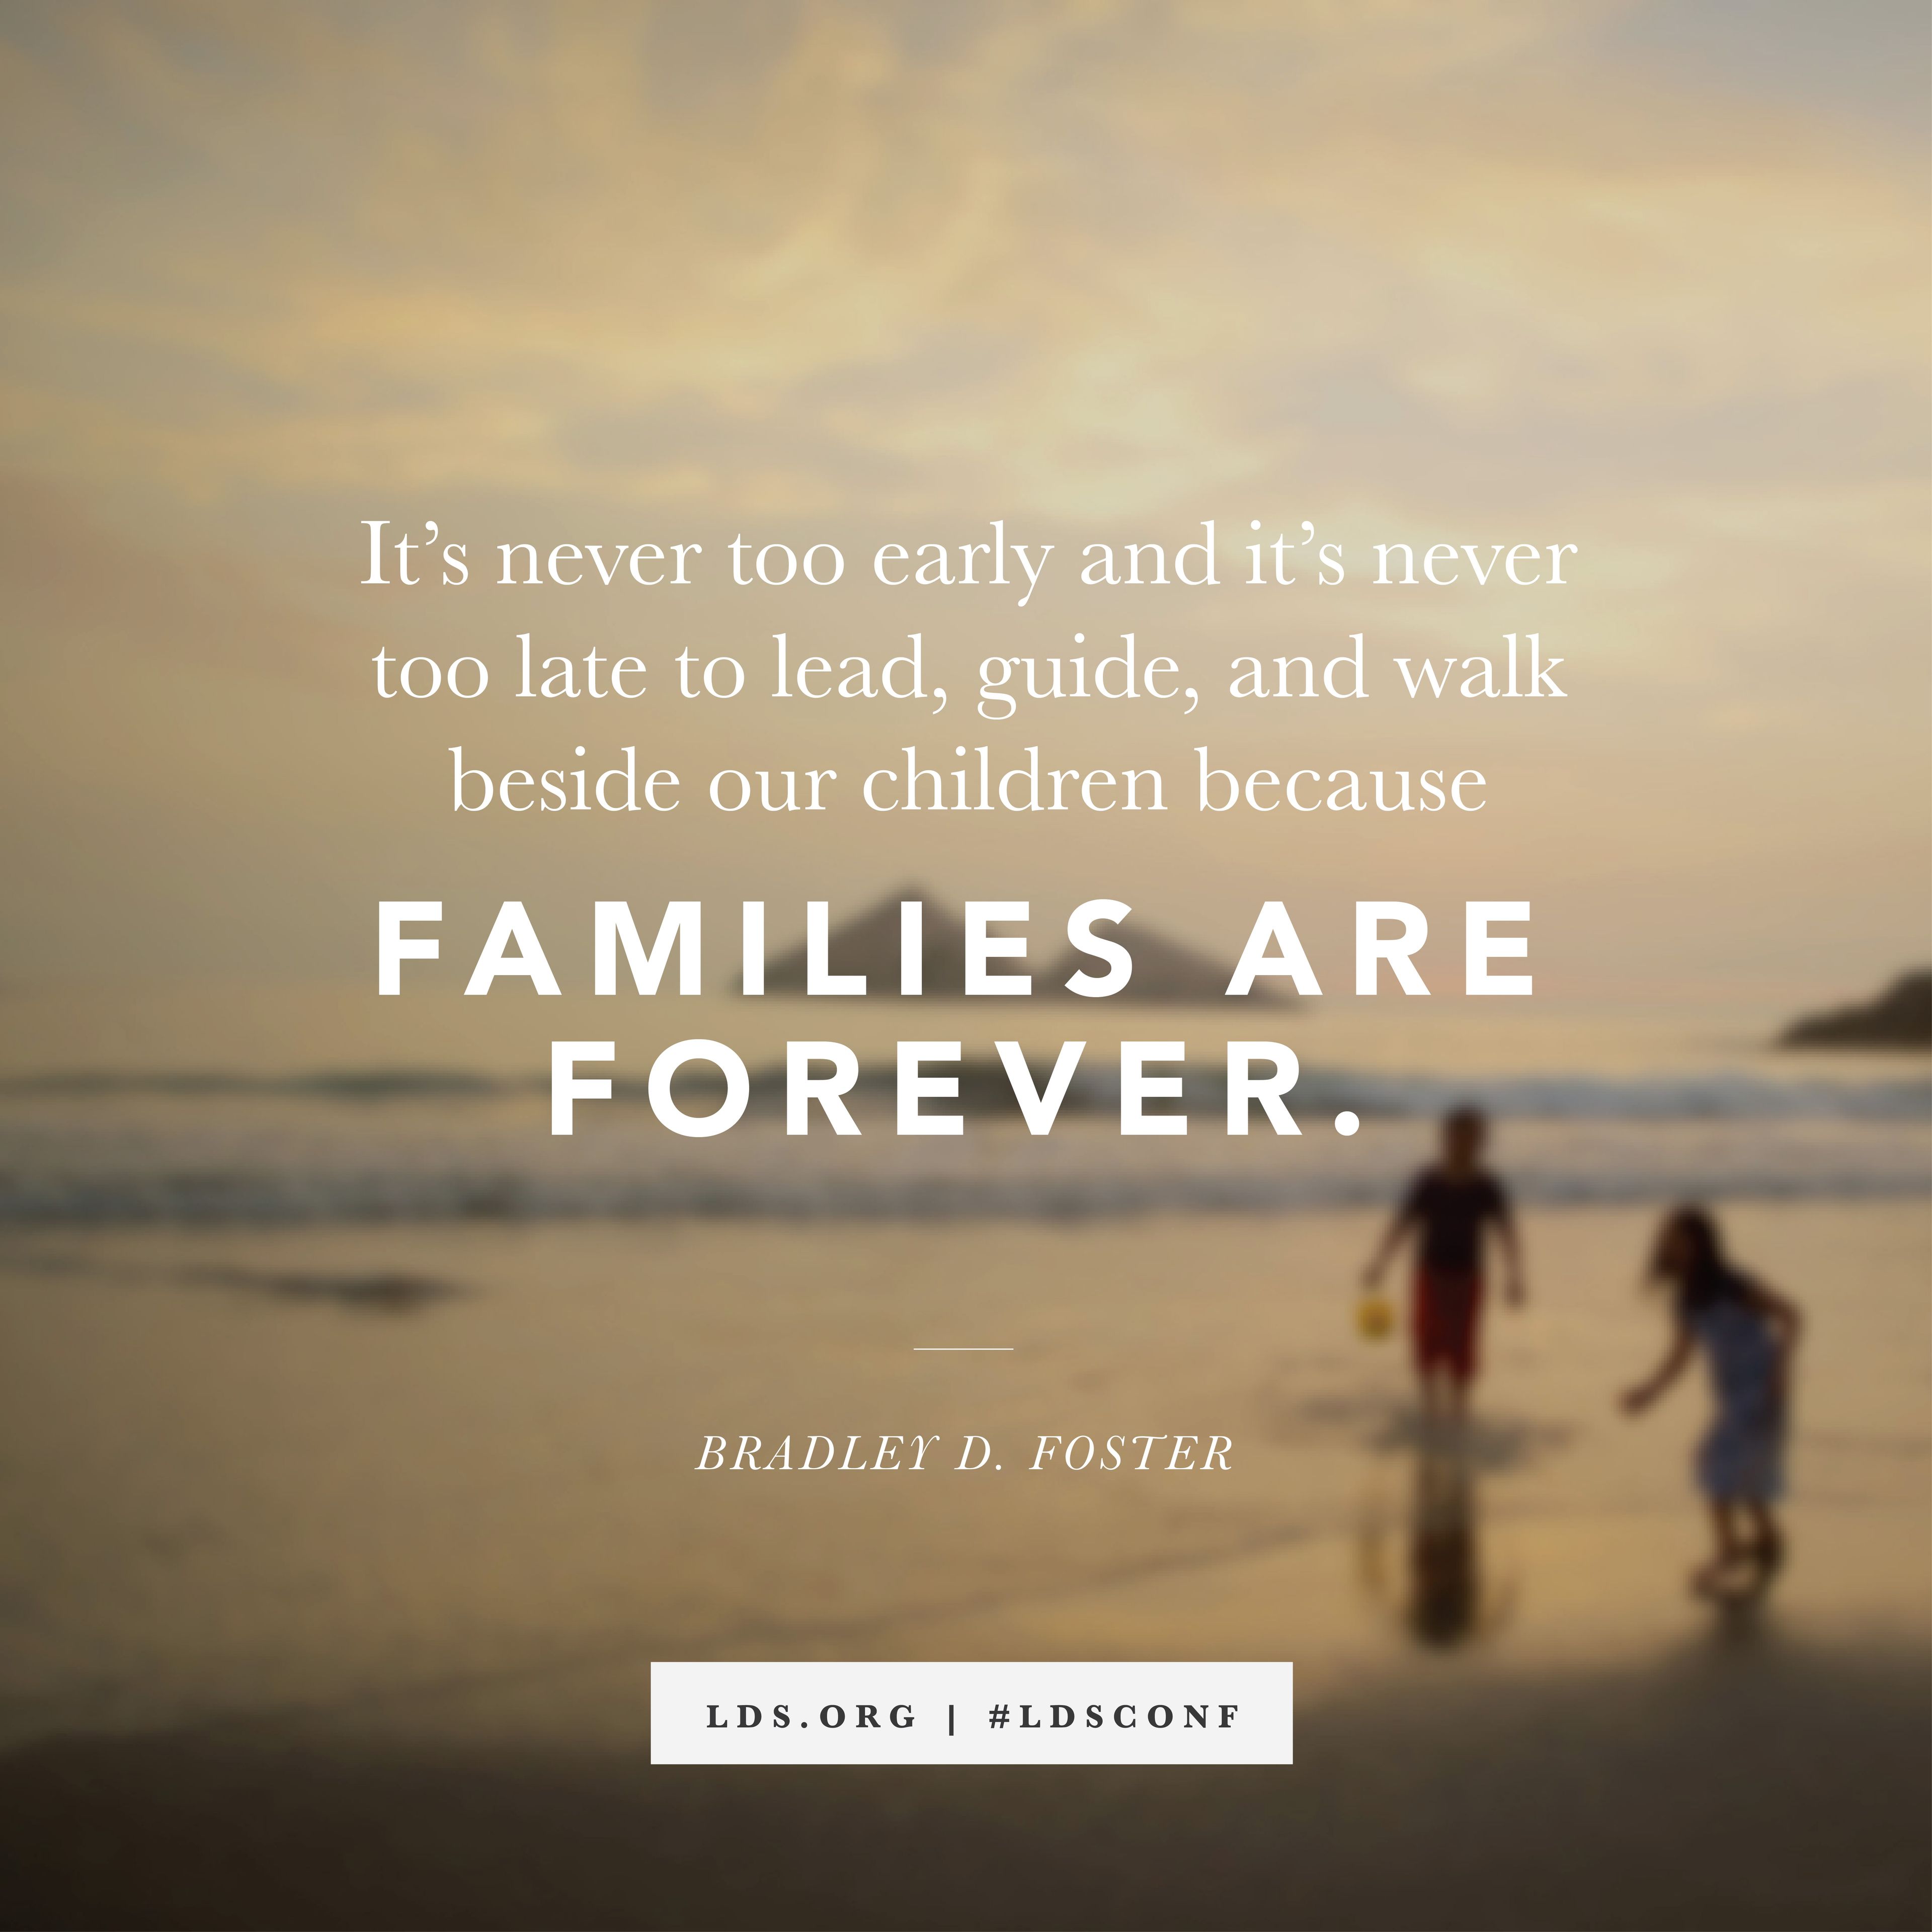 “It’s never too early and it’s never too late to lead, guide, and walk beside our children, because families are forever.” —Elder Bradley D. Foster, “It’s Never Too Early and It’s Never Too Late” © See Individual Images ipCode 1.